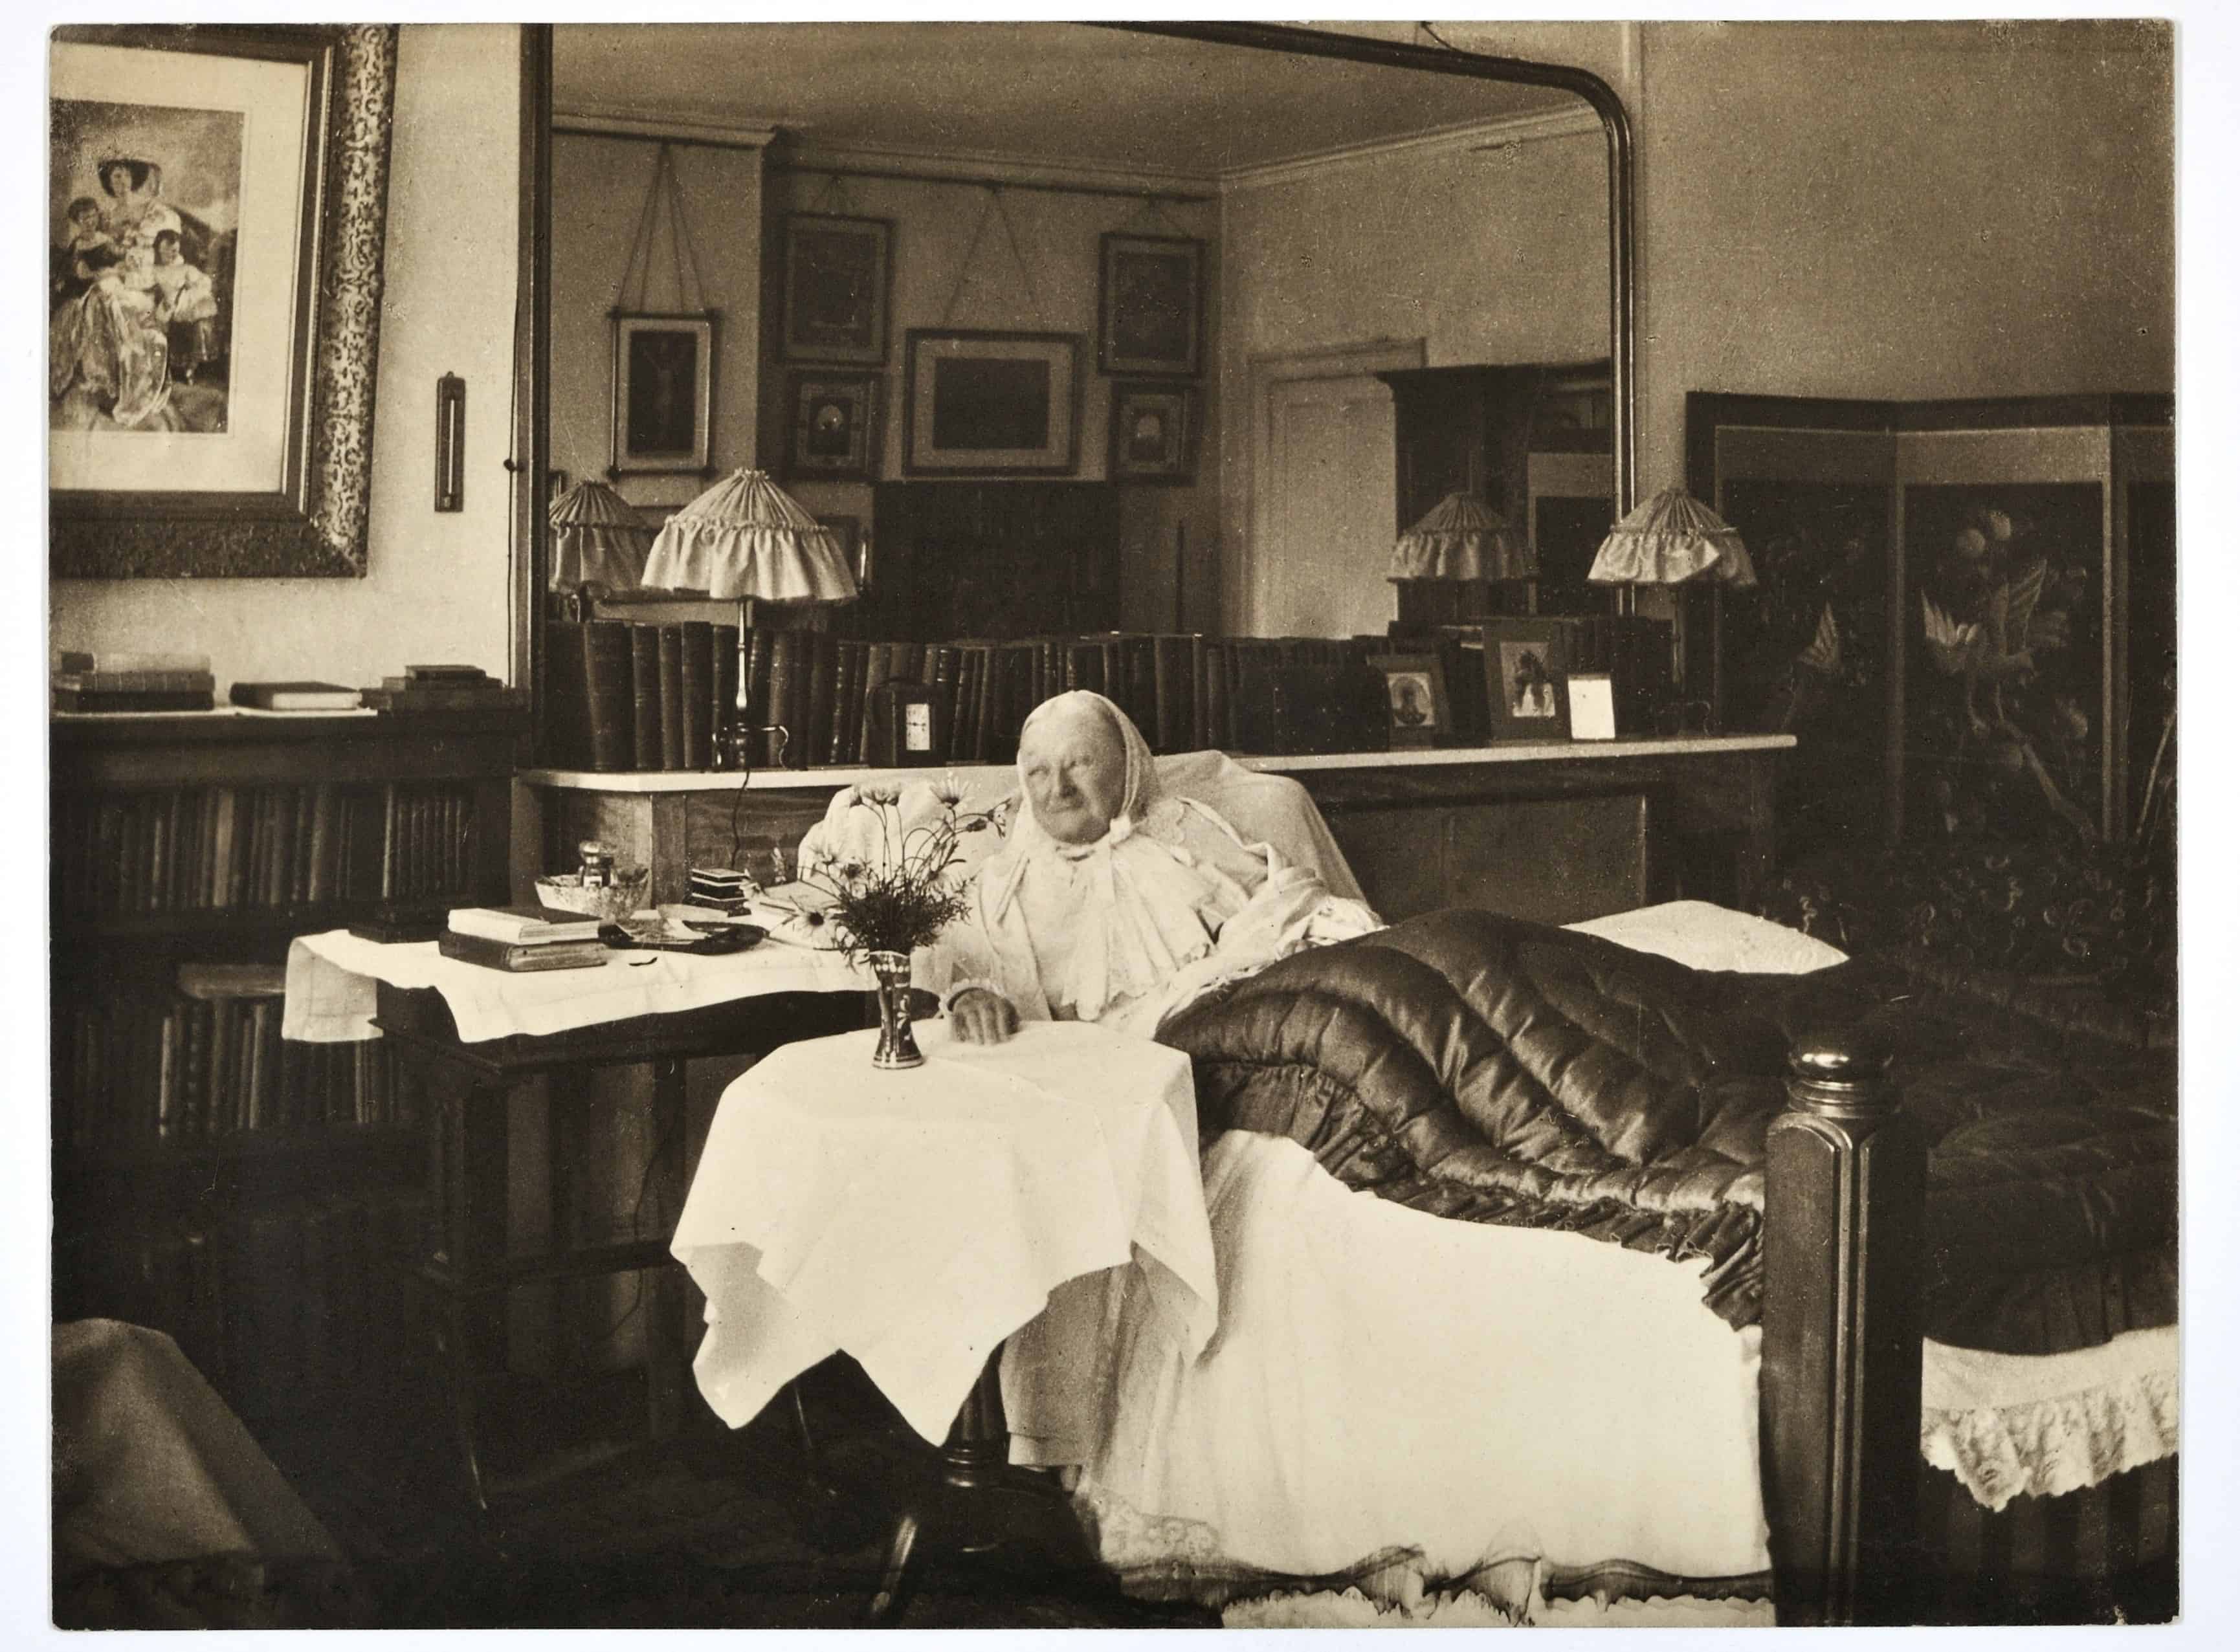 Florence Nightingale in bed at South Street, aged 86